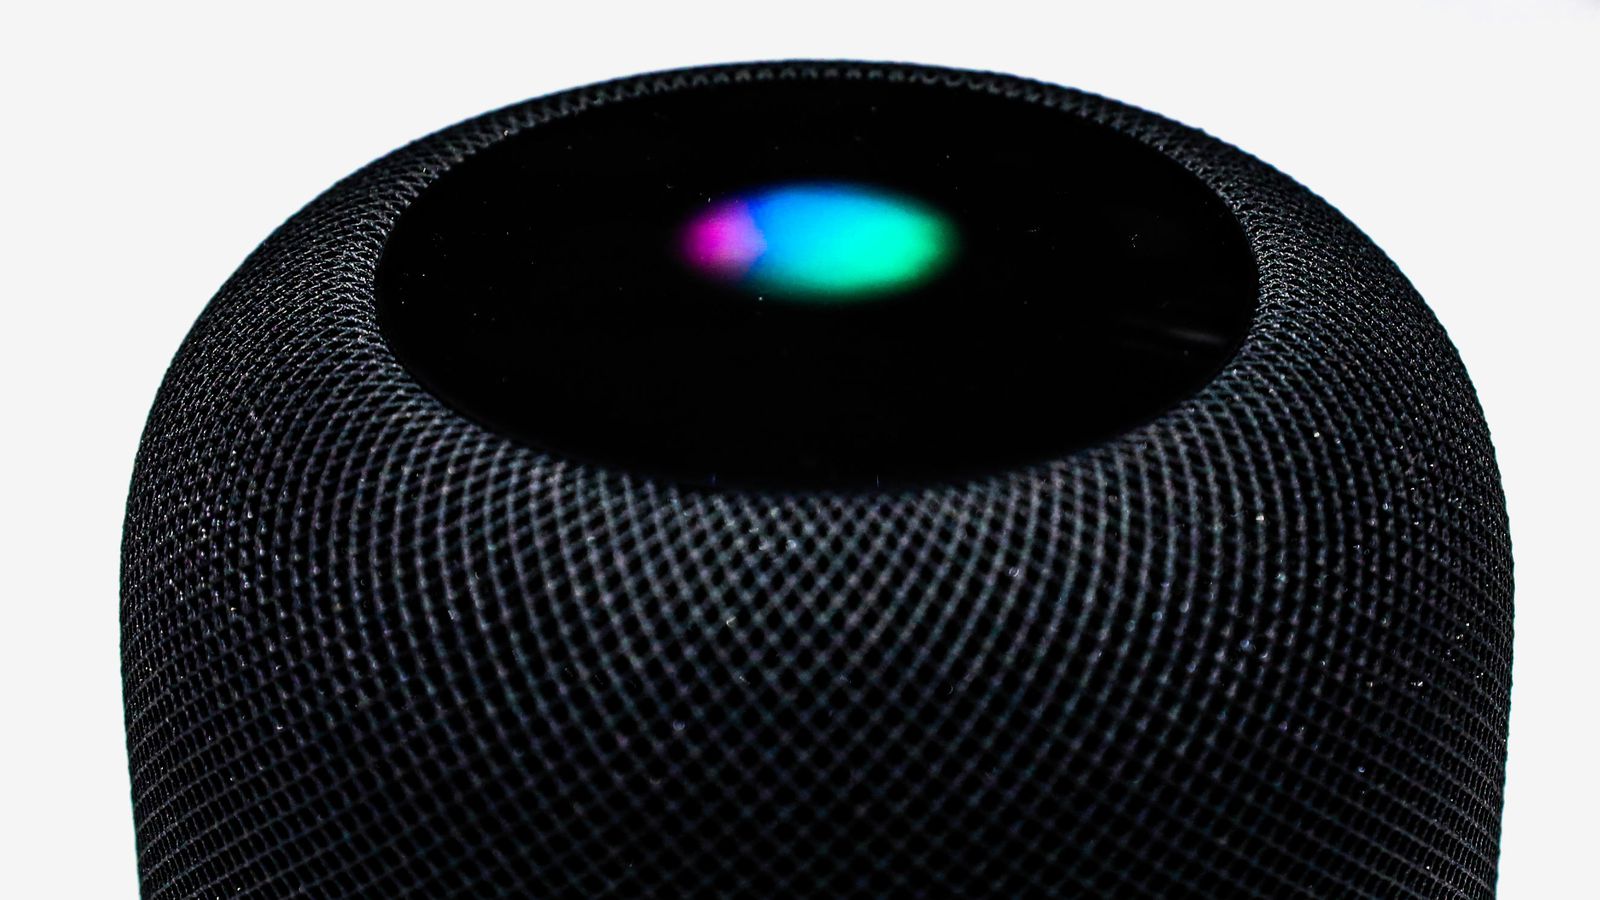 Apple to launch a SiriOS in 2020, report says